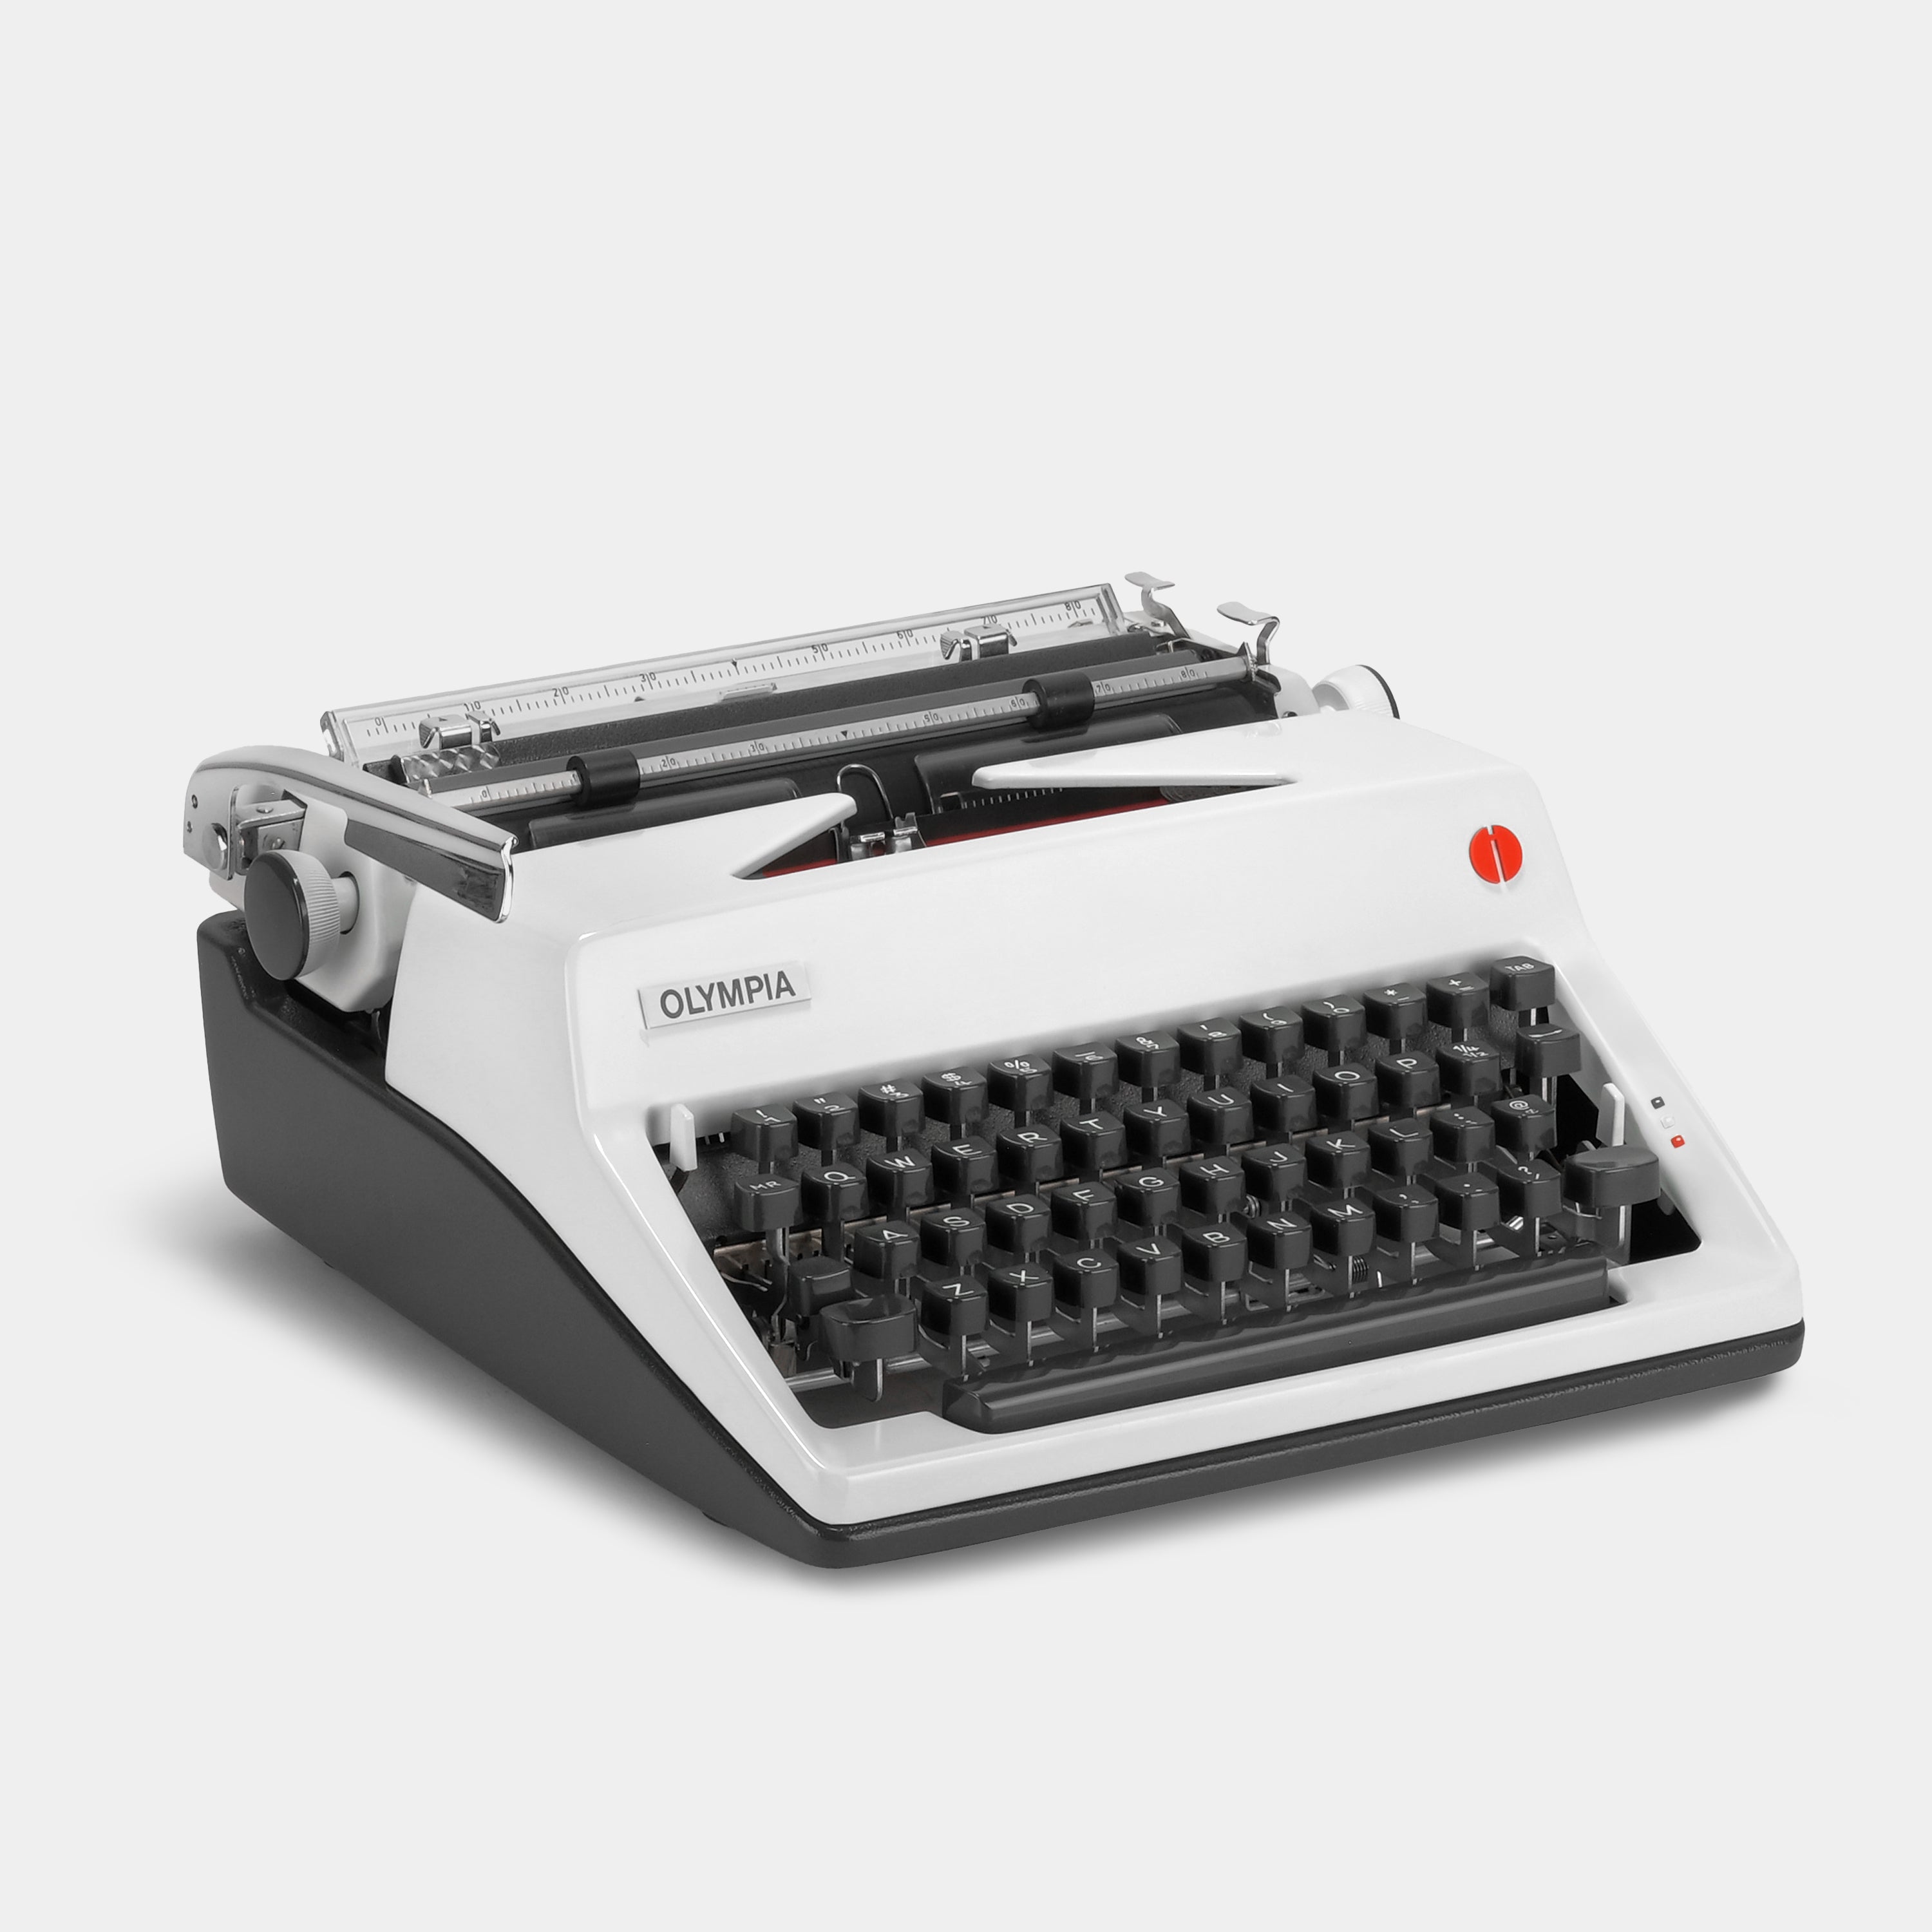 Olympia International SM8 White and Grey Manual Typewriter and Case